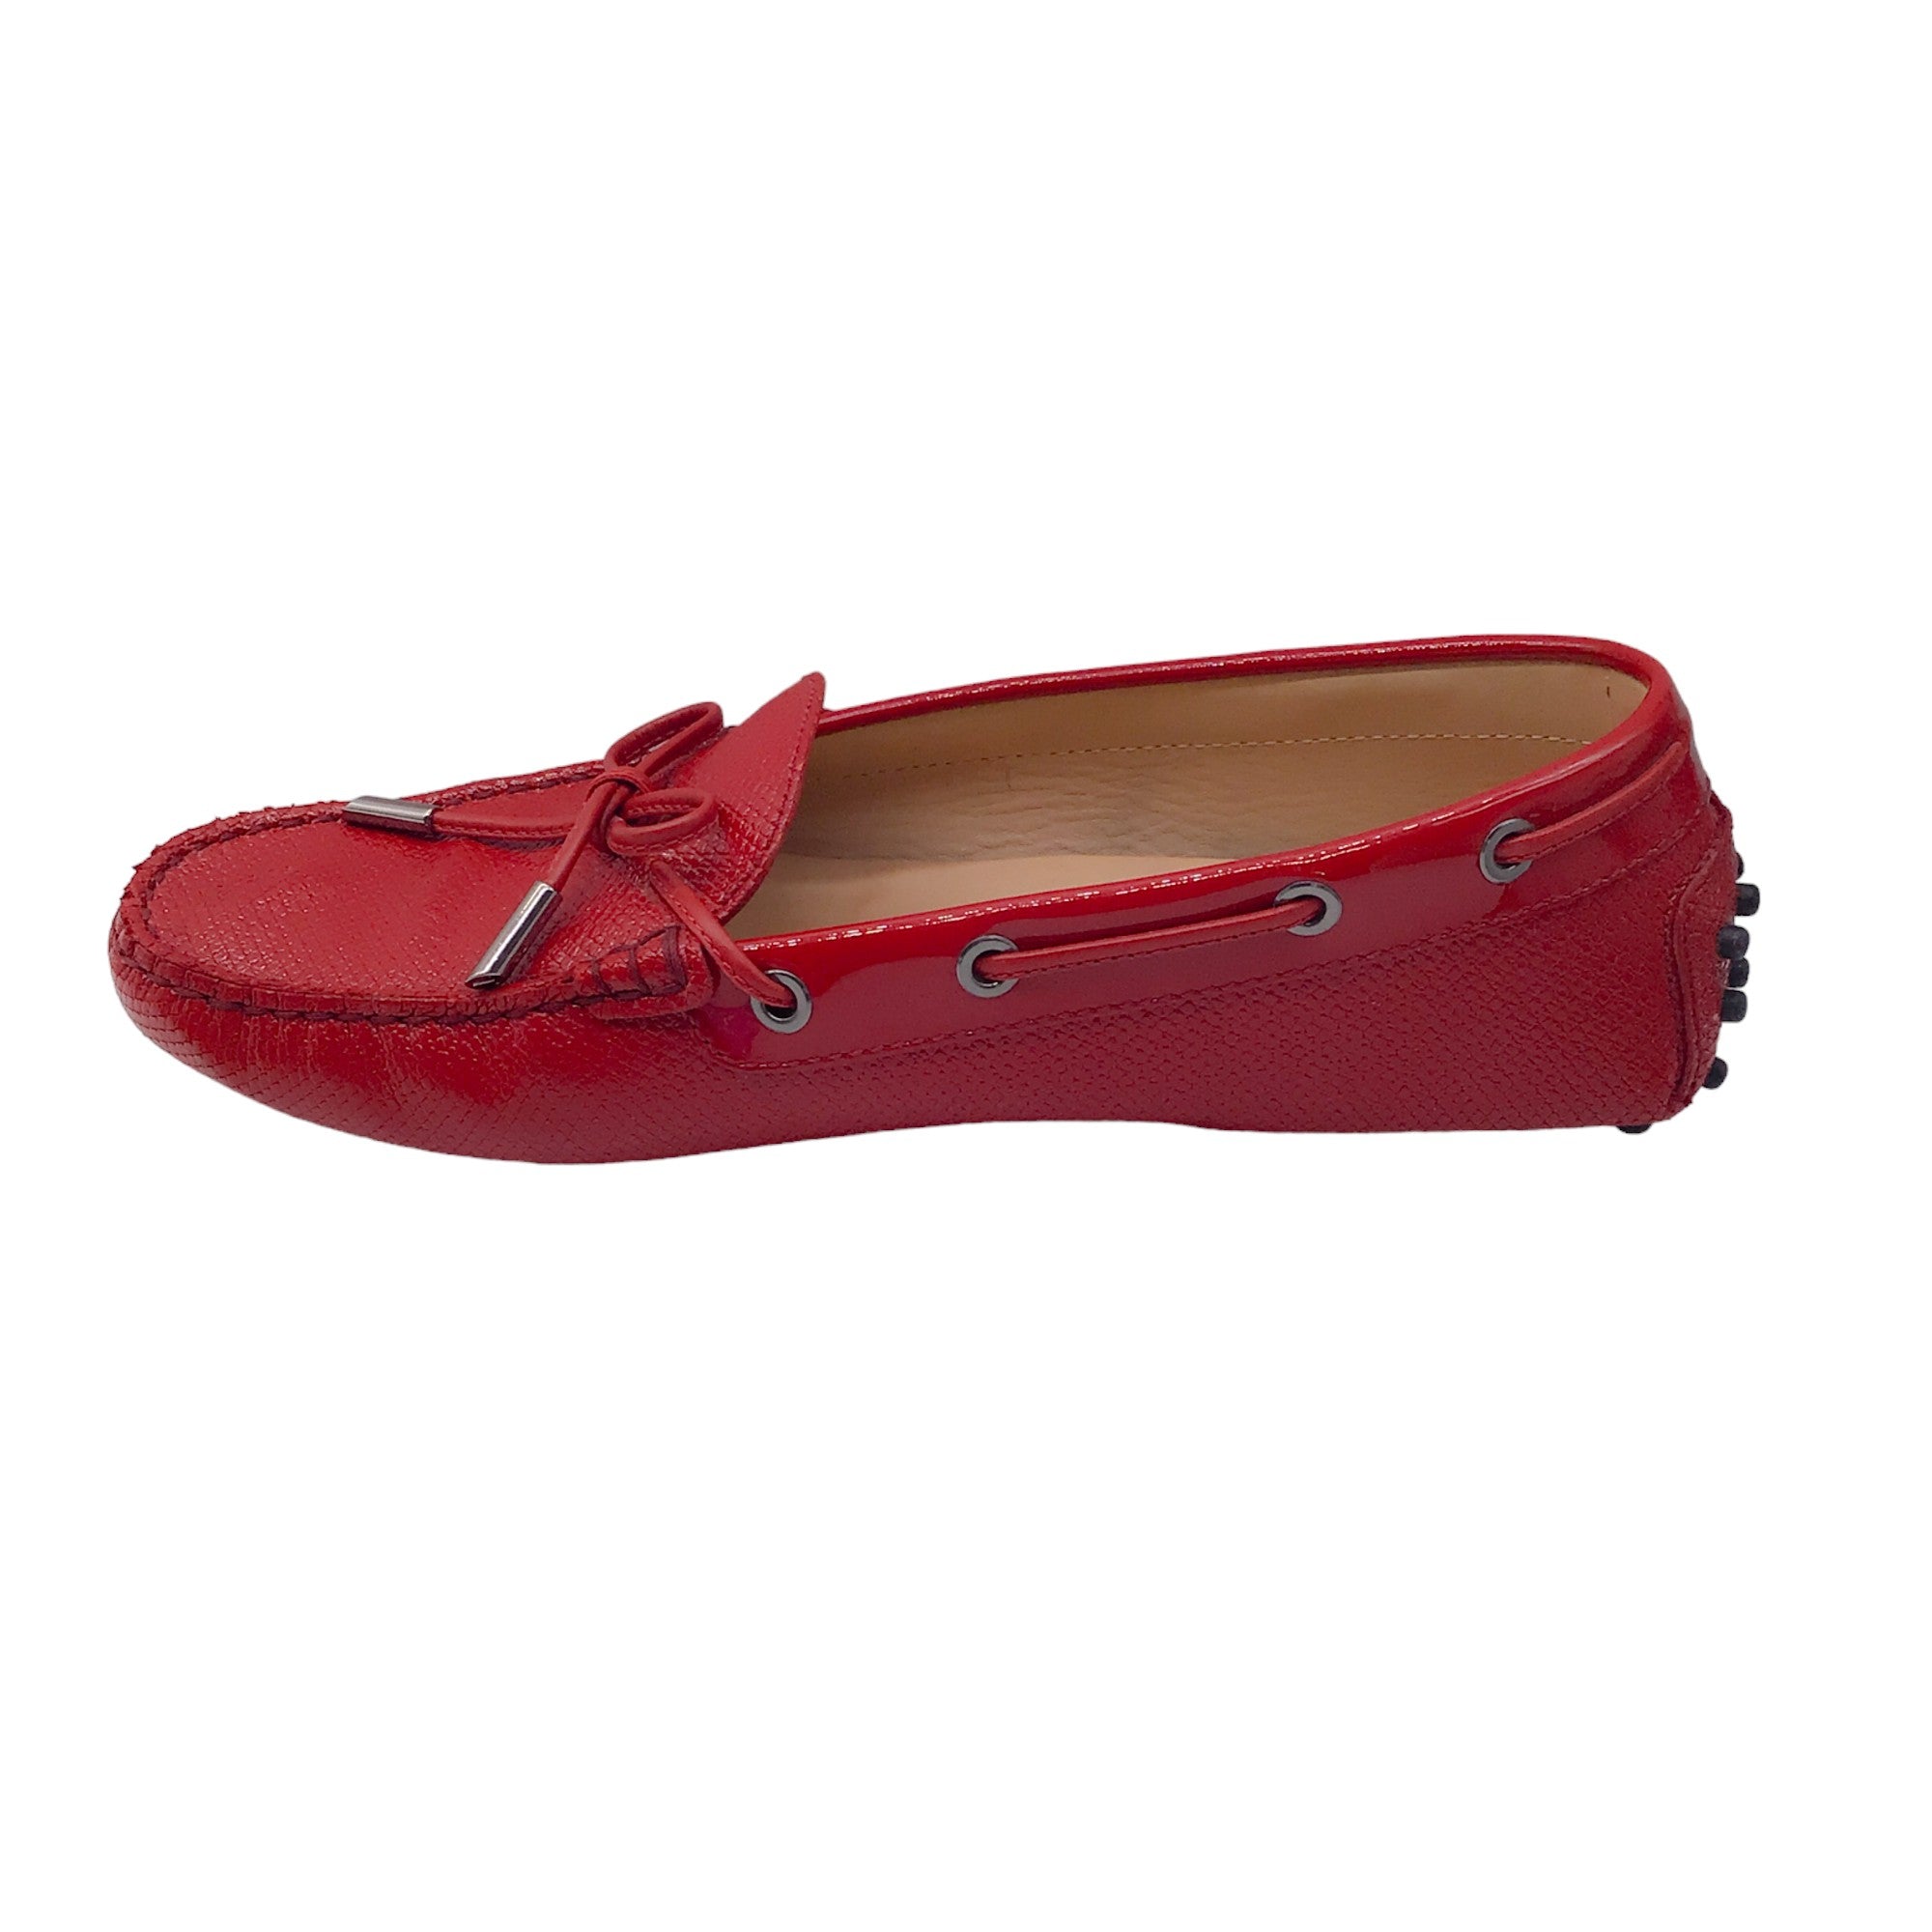 Tod's Red Grained Patent Leather Flats / Loafers